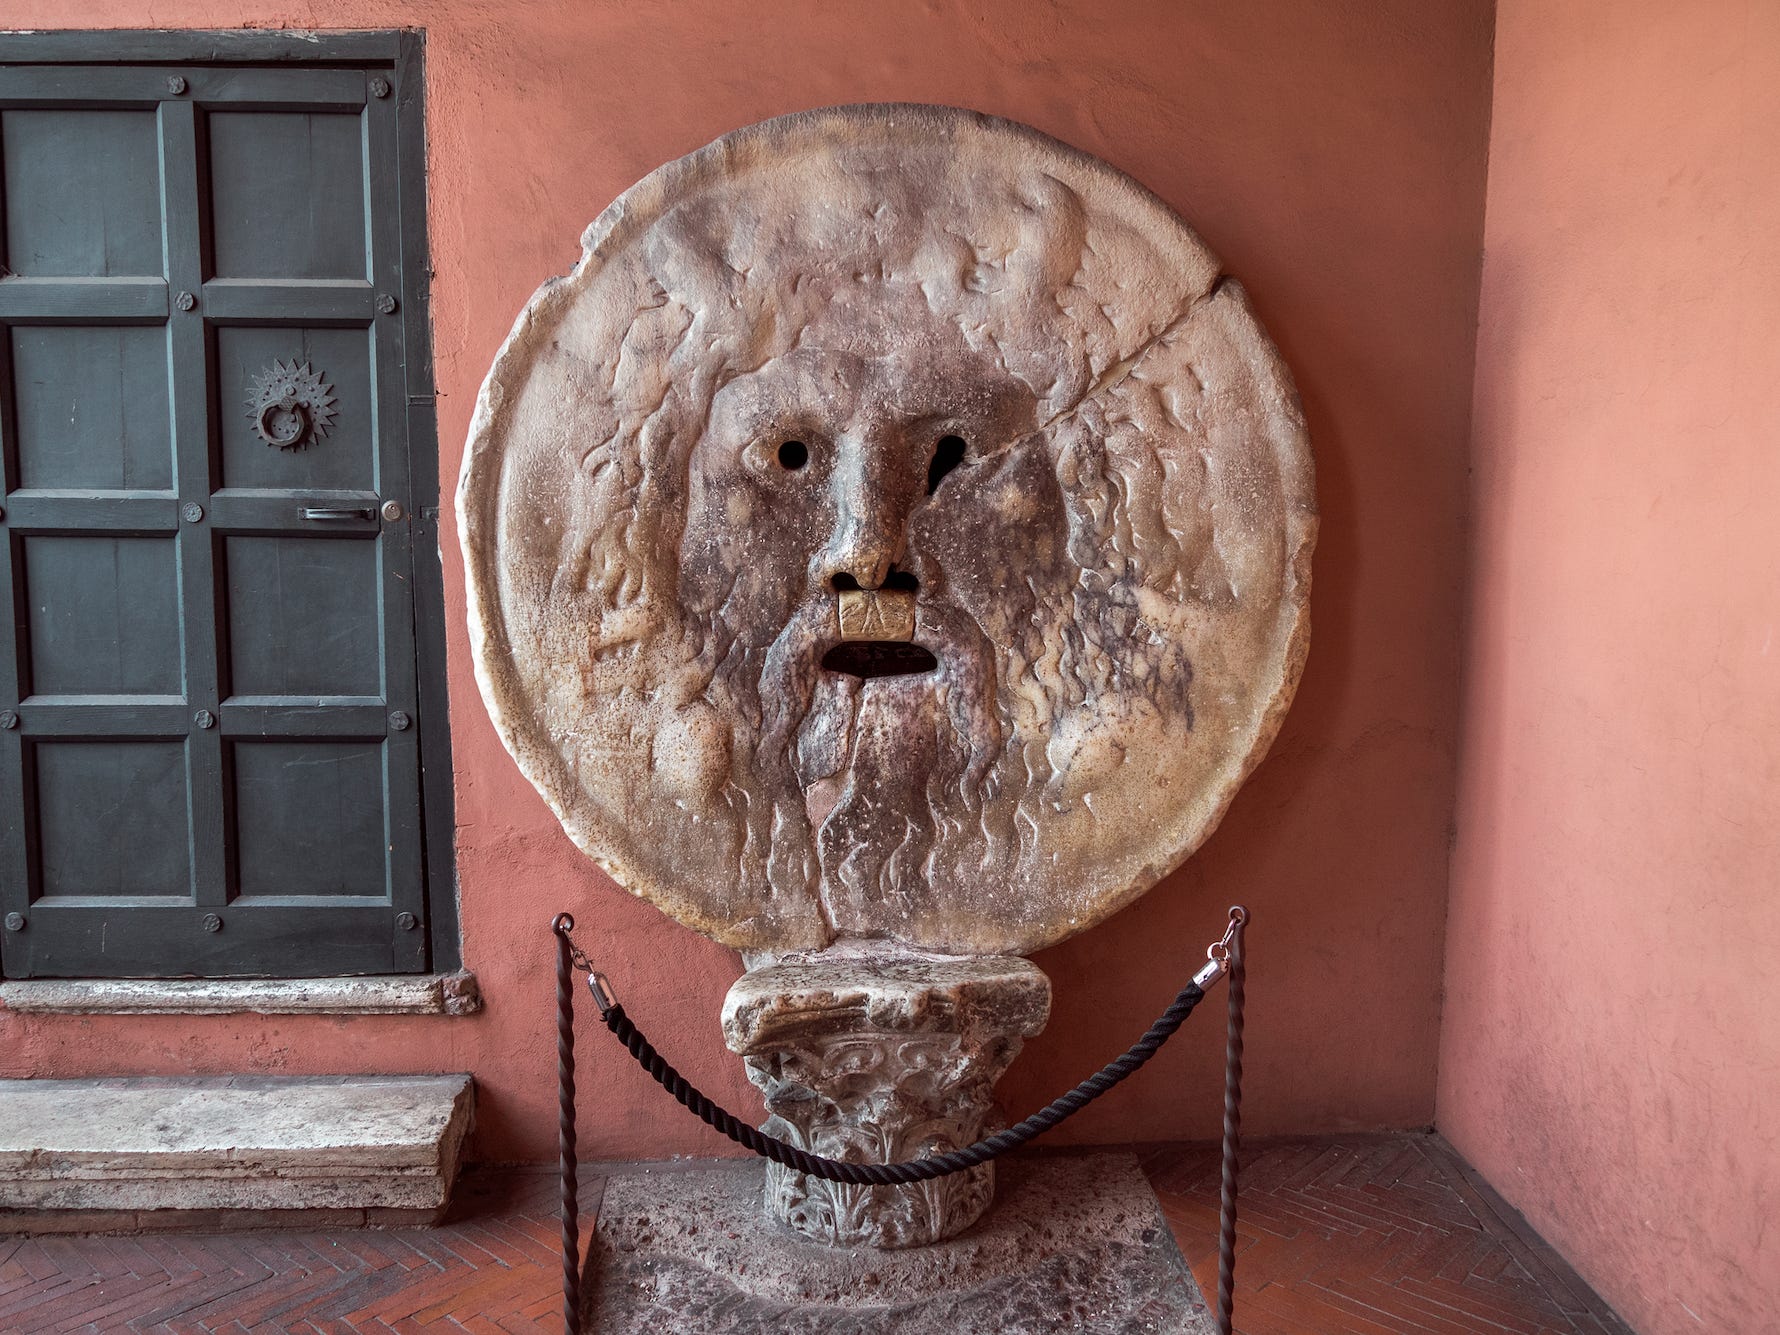 <p><span>Made famous by its appearance in classic films like "Roman Holiday," the Mouth of Truth may not live up to the hype for many visitors. </span></p><p>According to medieval legend, the stone mask will bite off the hand of any liar who enters its mouth, which has made it popular with tourists.</p><p><span>But the brief photo opportunity doesn't justify the long queues. Plus, it was probably just </span><a href="https://www.timetravelrome.com/2020/09/18/hercules-battles-cacus-in-the-forum-boarium/"><span>used as a drain cover</span></a><span> in the Temple of Hercules. </span></p>